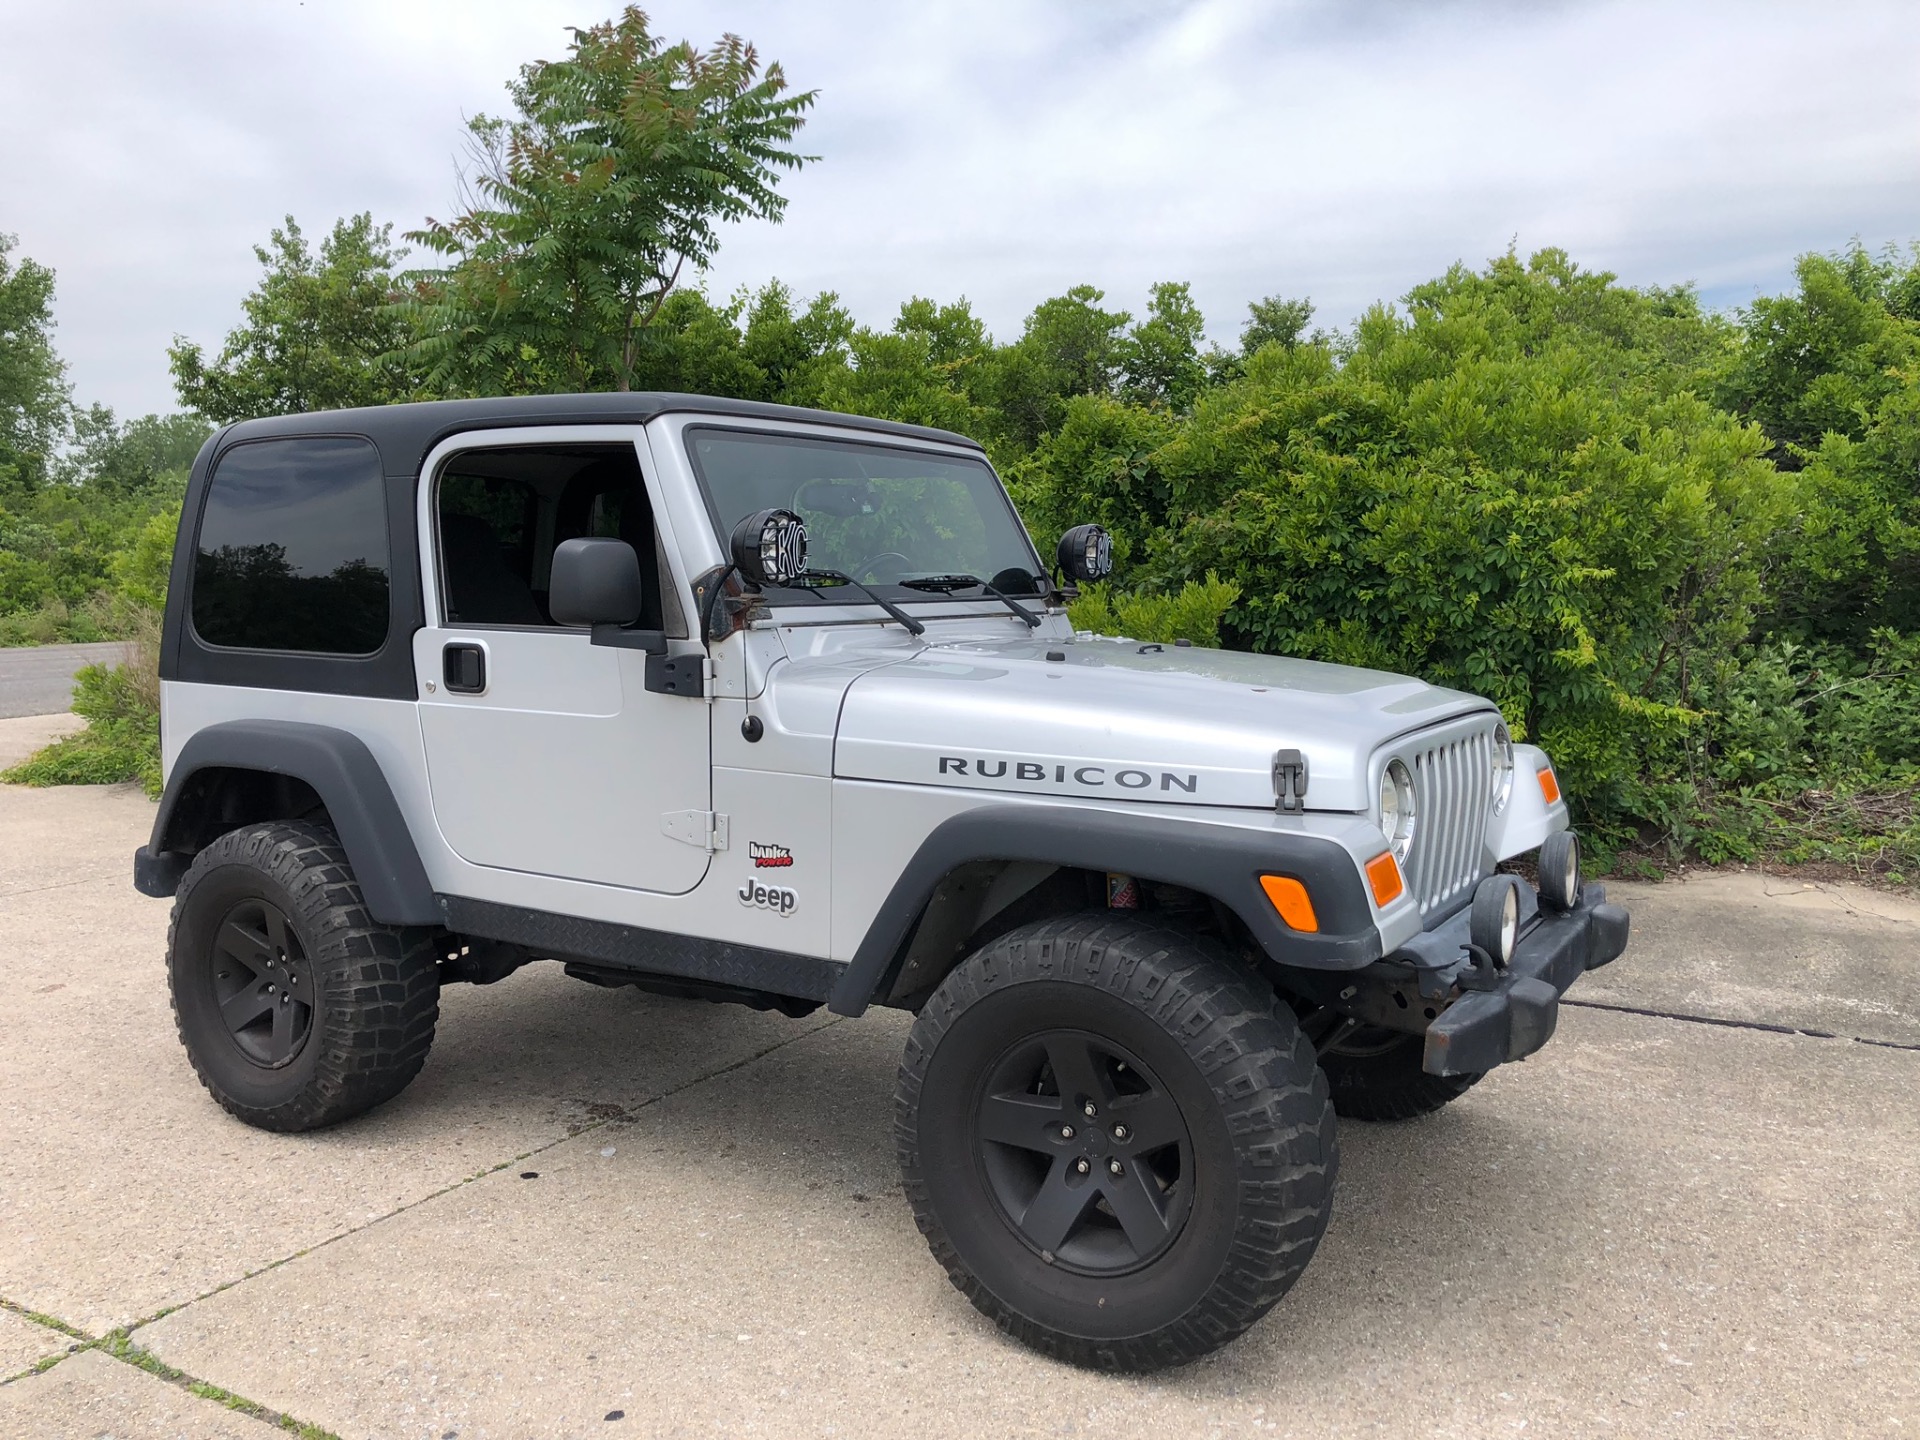 Used 2005 Jeep Wrangler Rubicon Rubicon For Sale ($14,900) | Legend Leasing  Stock #2569